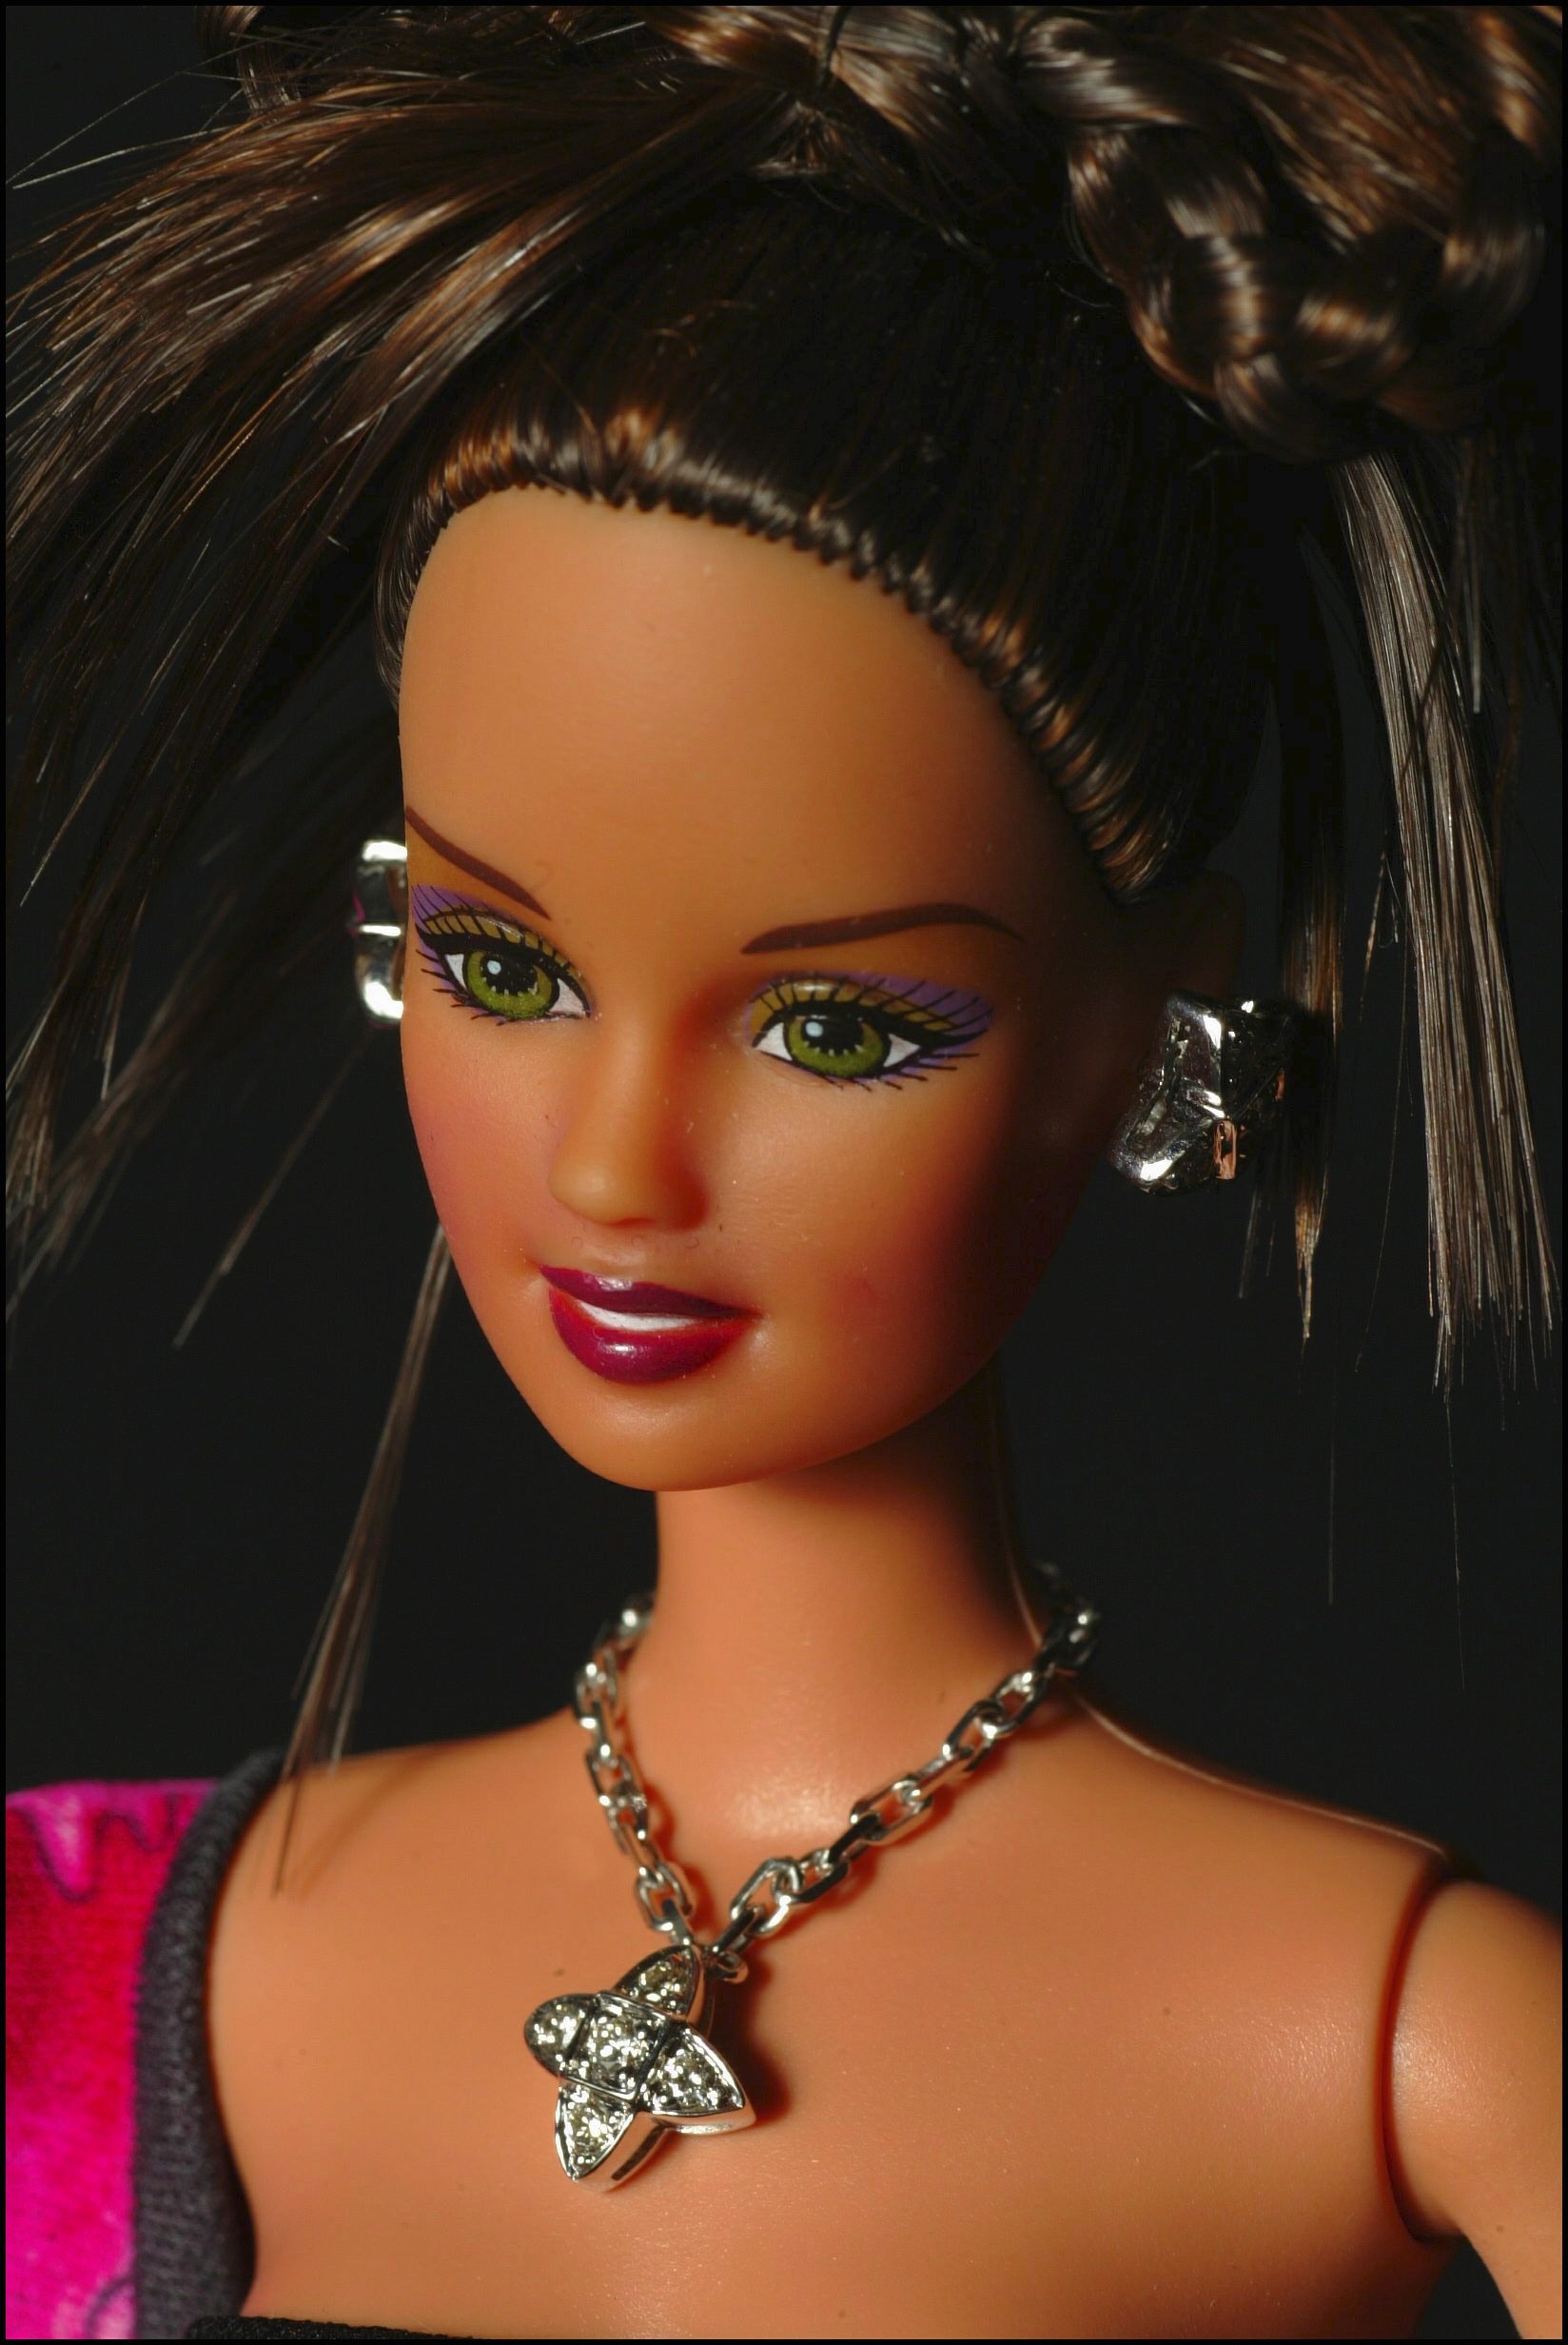 Barbie Jewelry 2003 Collection To Be Sold By Auction To Benefit The French Red-Cross. On December 11, 2003 In Paris, France